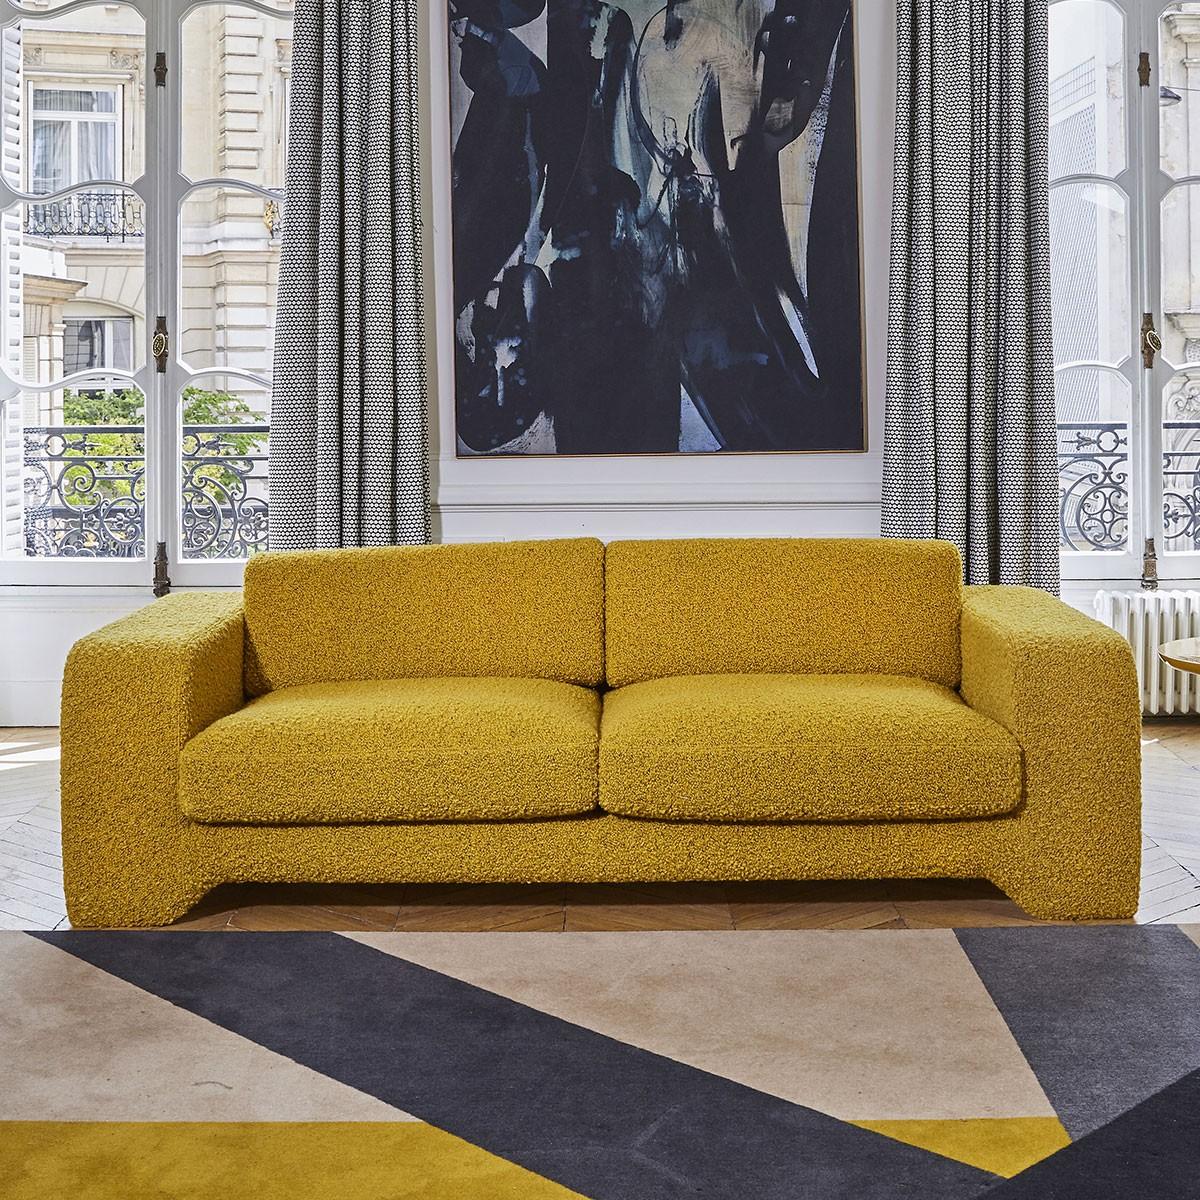 Popus Editions Giovanna 4 seater sofa in Navy Verone Velvet Upholstery

Giovanna is a sofa with a strong profile. A sober, plush line, with this famous detail that changes everything, so as not to forget its strength of character and this charming